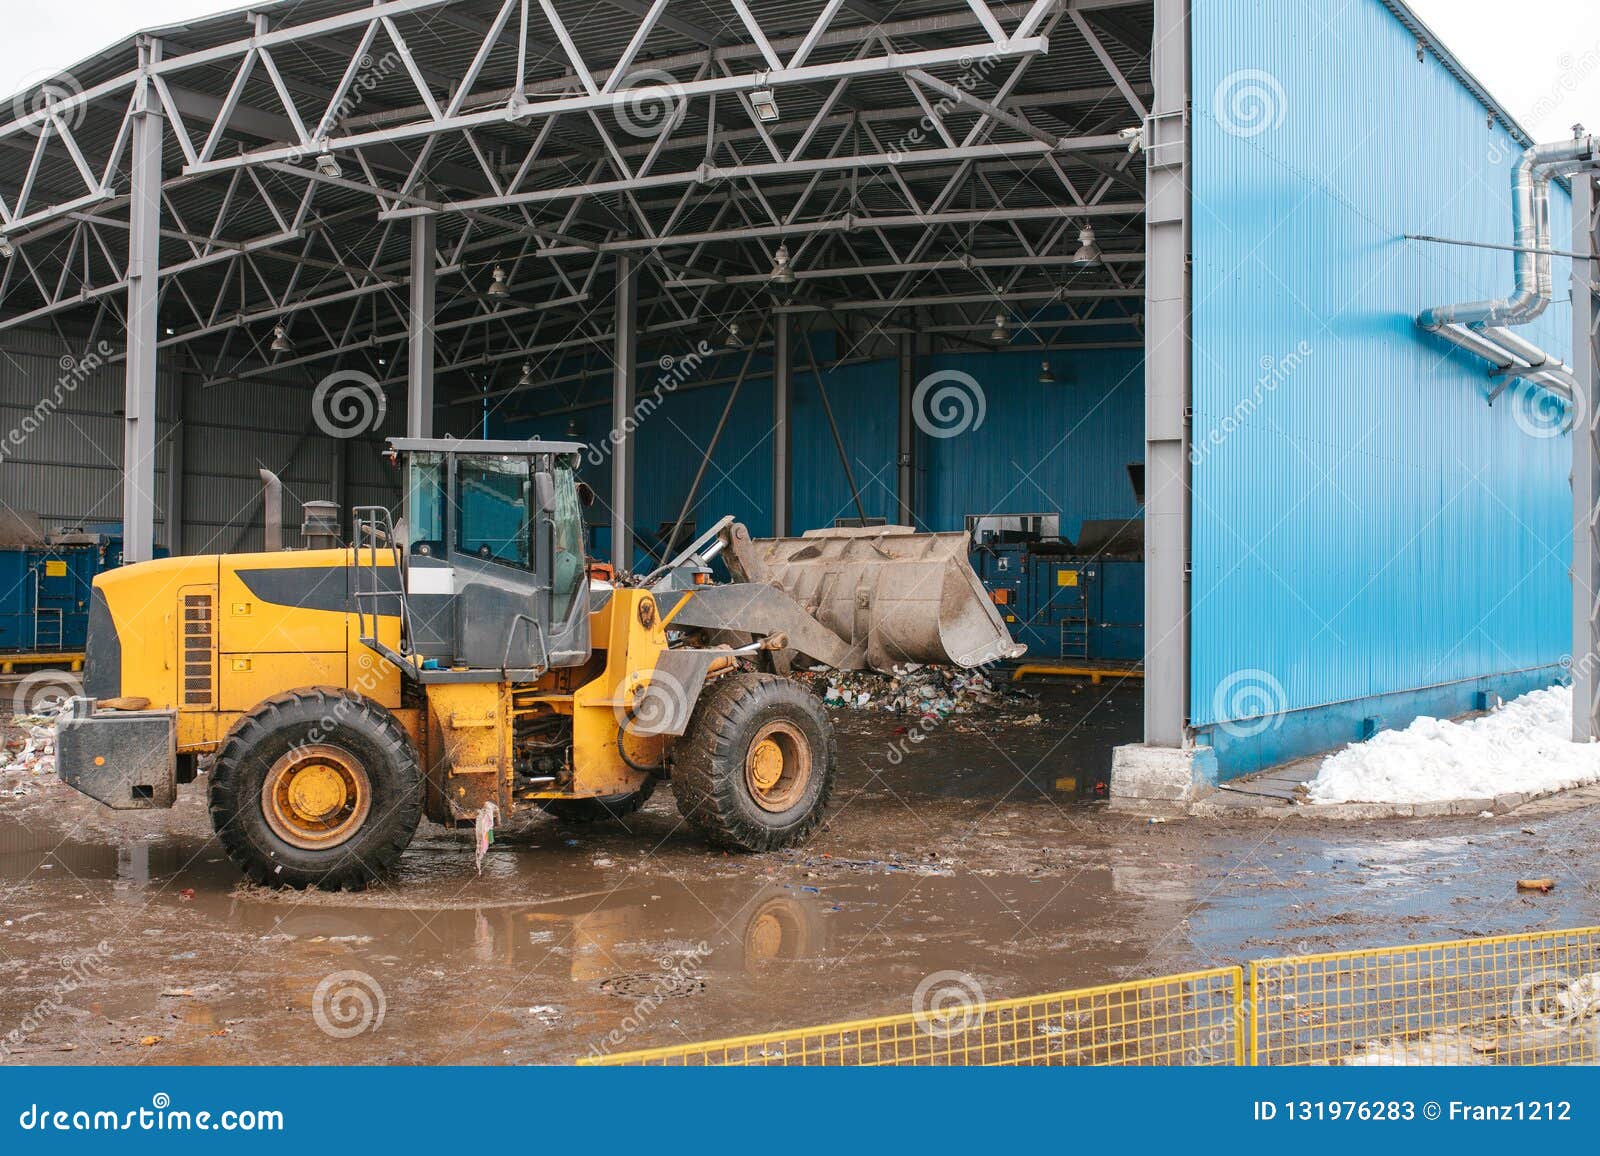 special machinery or bulldozer work on the site of waste unloading at the plant for waste disposal.